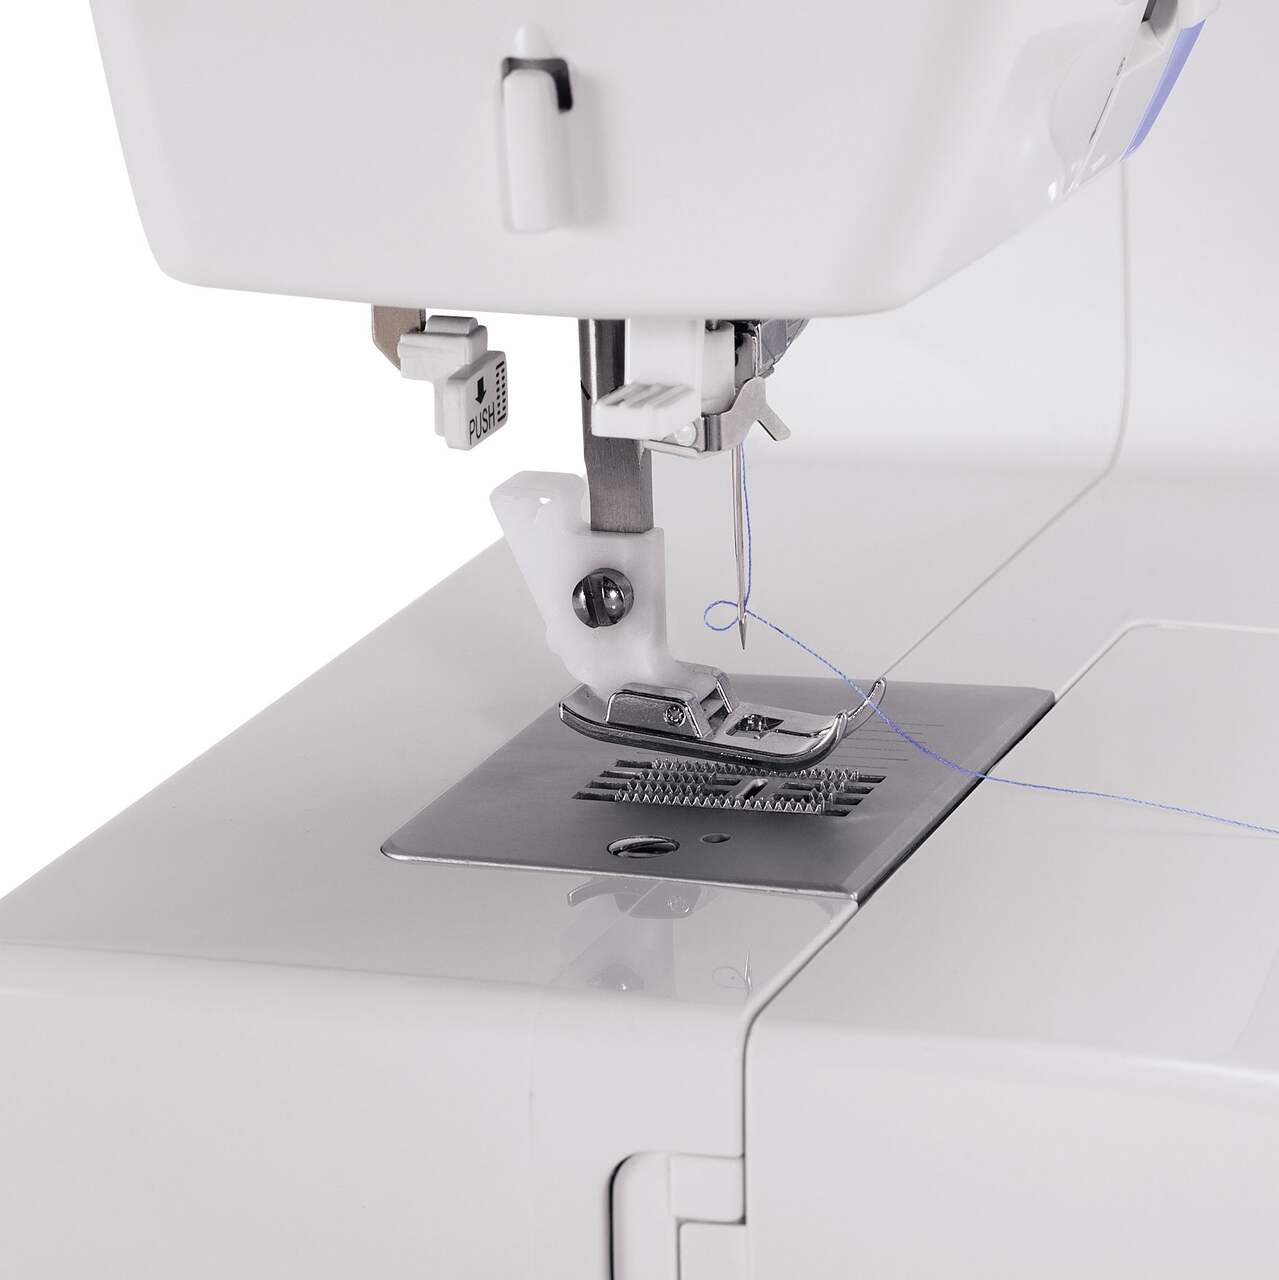 Singer 2282 - buy sewing Machine: prices, reviews, specifications > price  in stores USA: Washington, New York, Las Vegas, San Francisco, Los Angeles,  Chicago